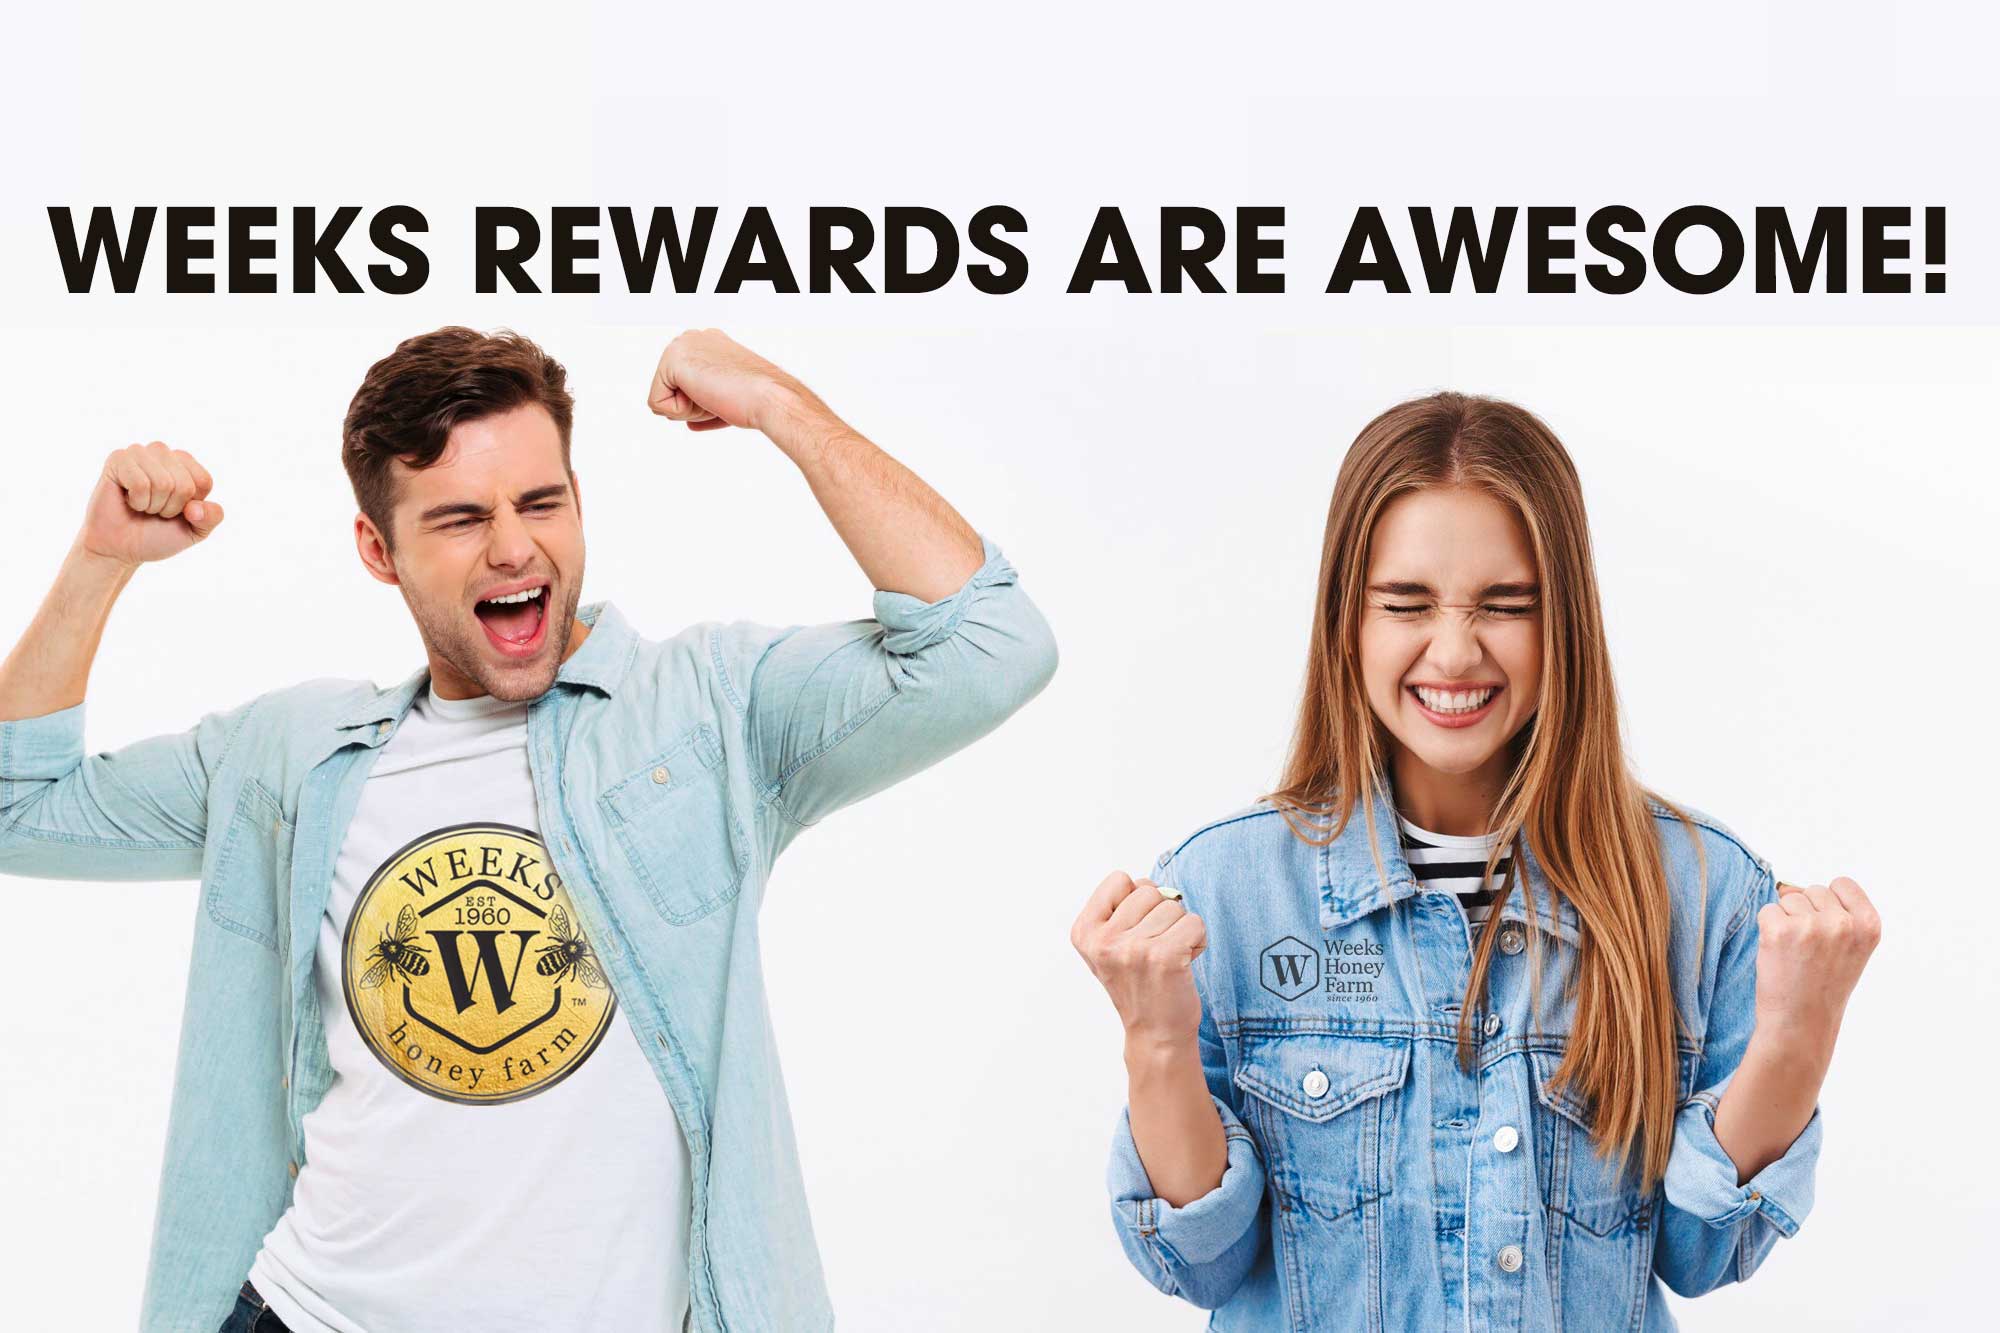 Weeks Rewards Program is awesome. Get Paid to Shop!